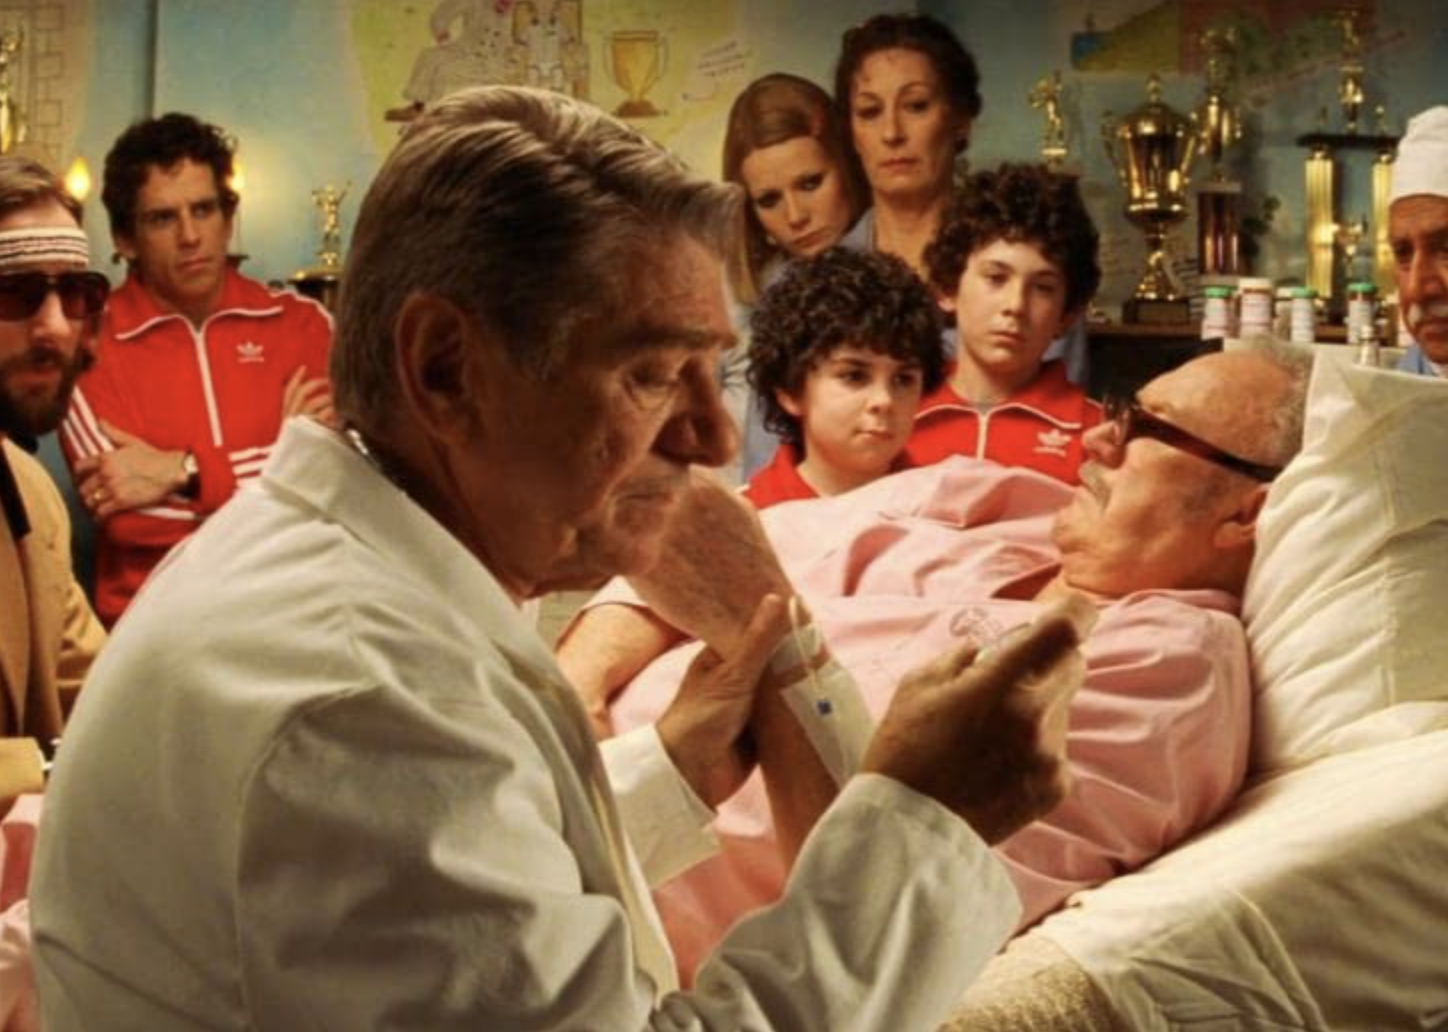 The cast of "The Royal Tenenbaums in a scene